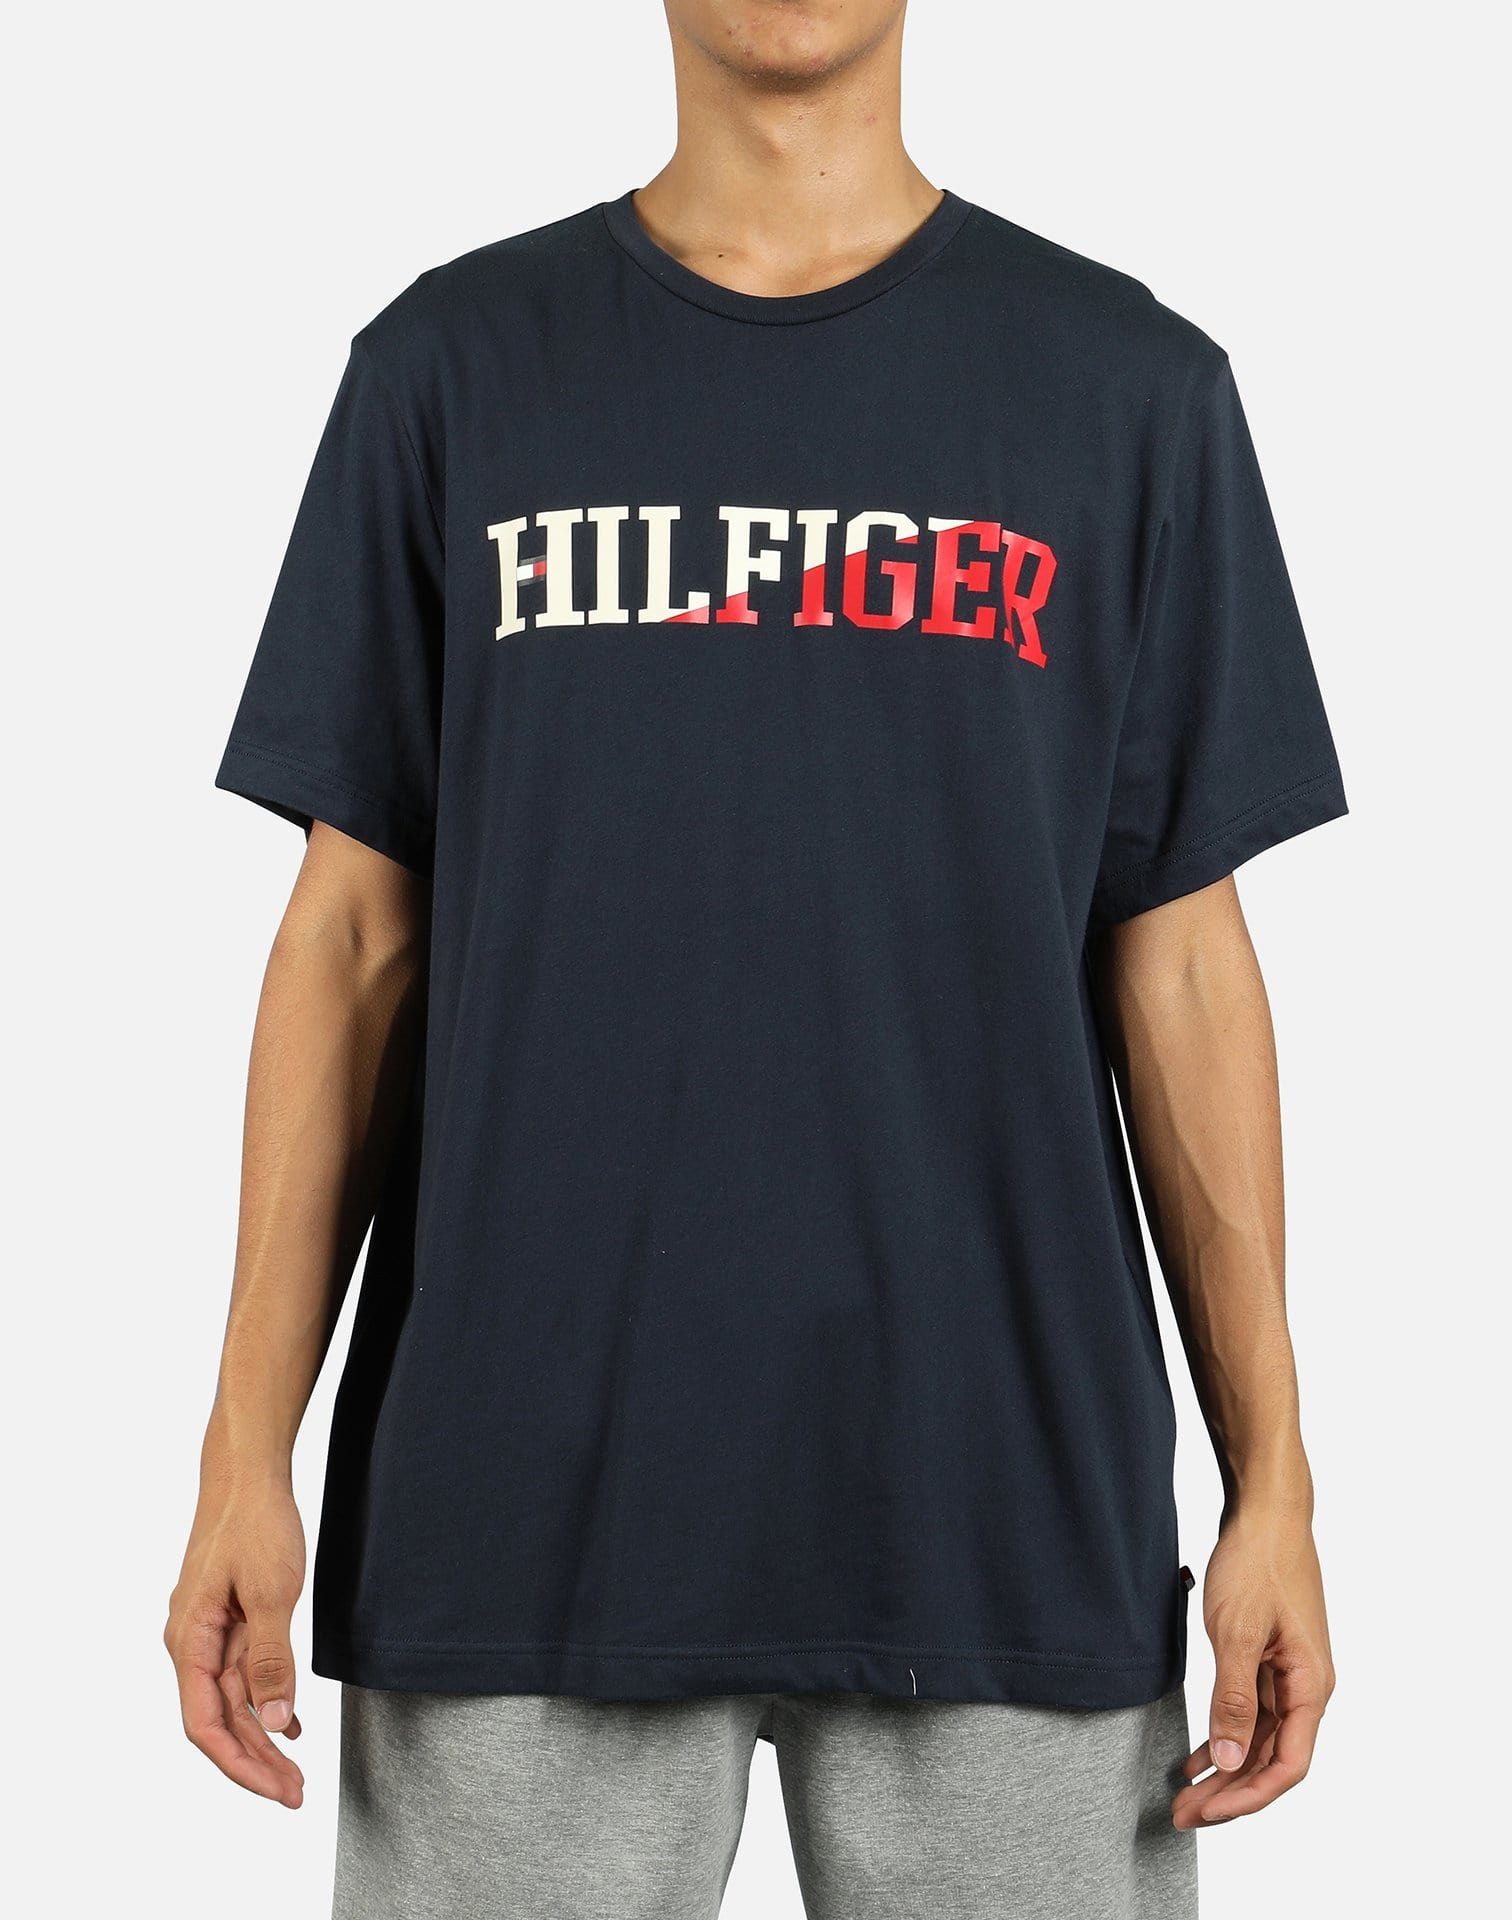 Tommy Hilfiger Men's Graphic TH Tee